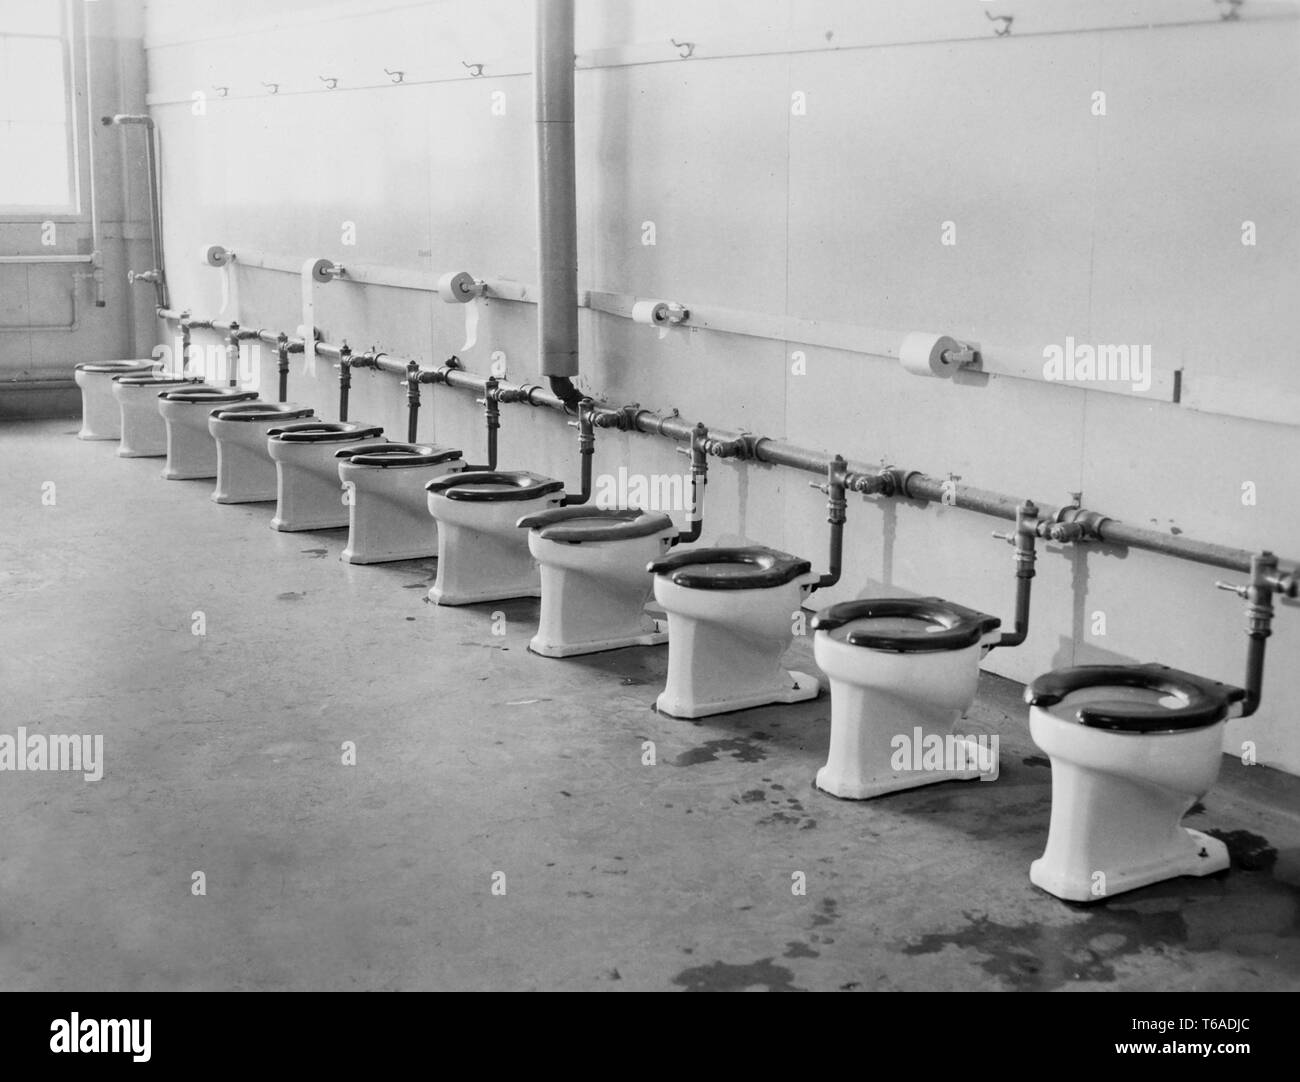 a-row-of-toilets-in-an-army-base-in-the-south-pacific-during-world-war-ii-ca-1943-T6ADJC.jpg